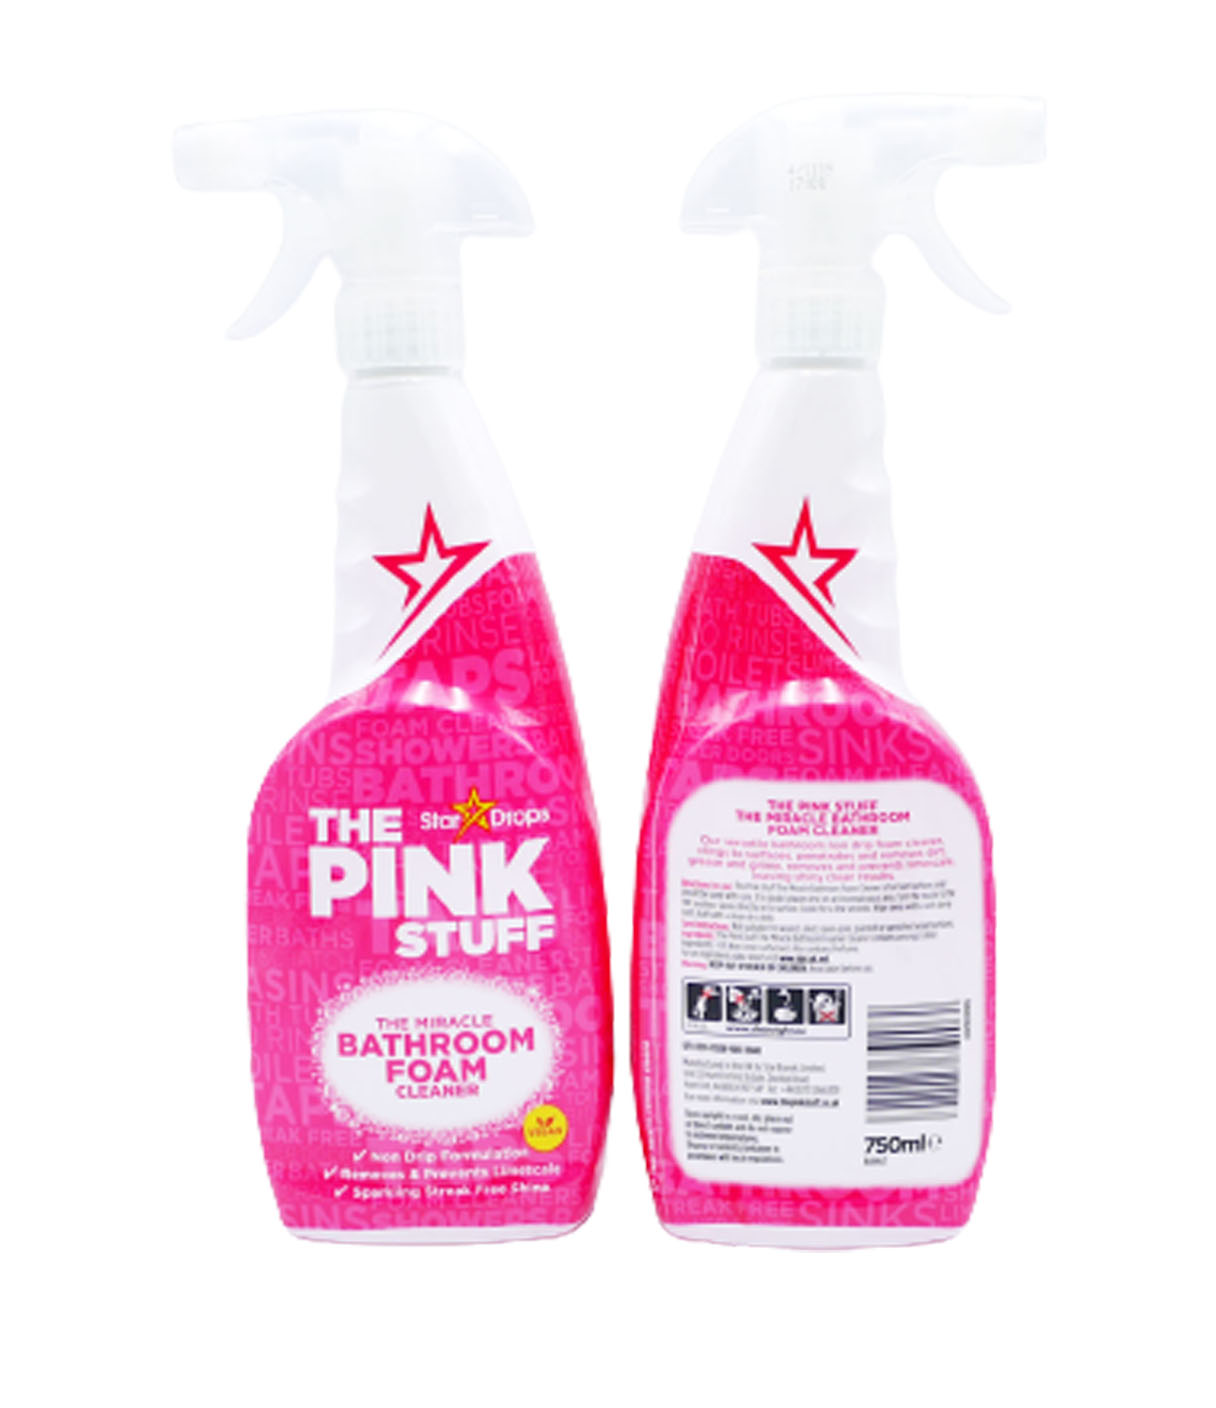 Stardrops The Pink Stuff Bathroom Foam Cleaner 750ml, Removes/Prevents Limescale